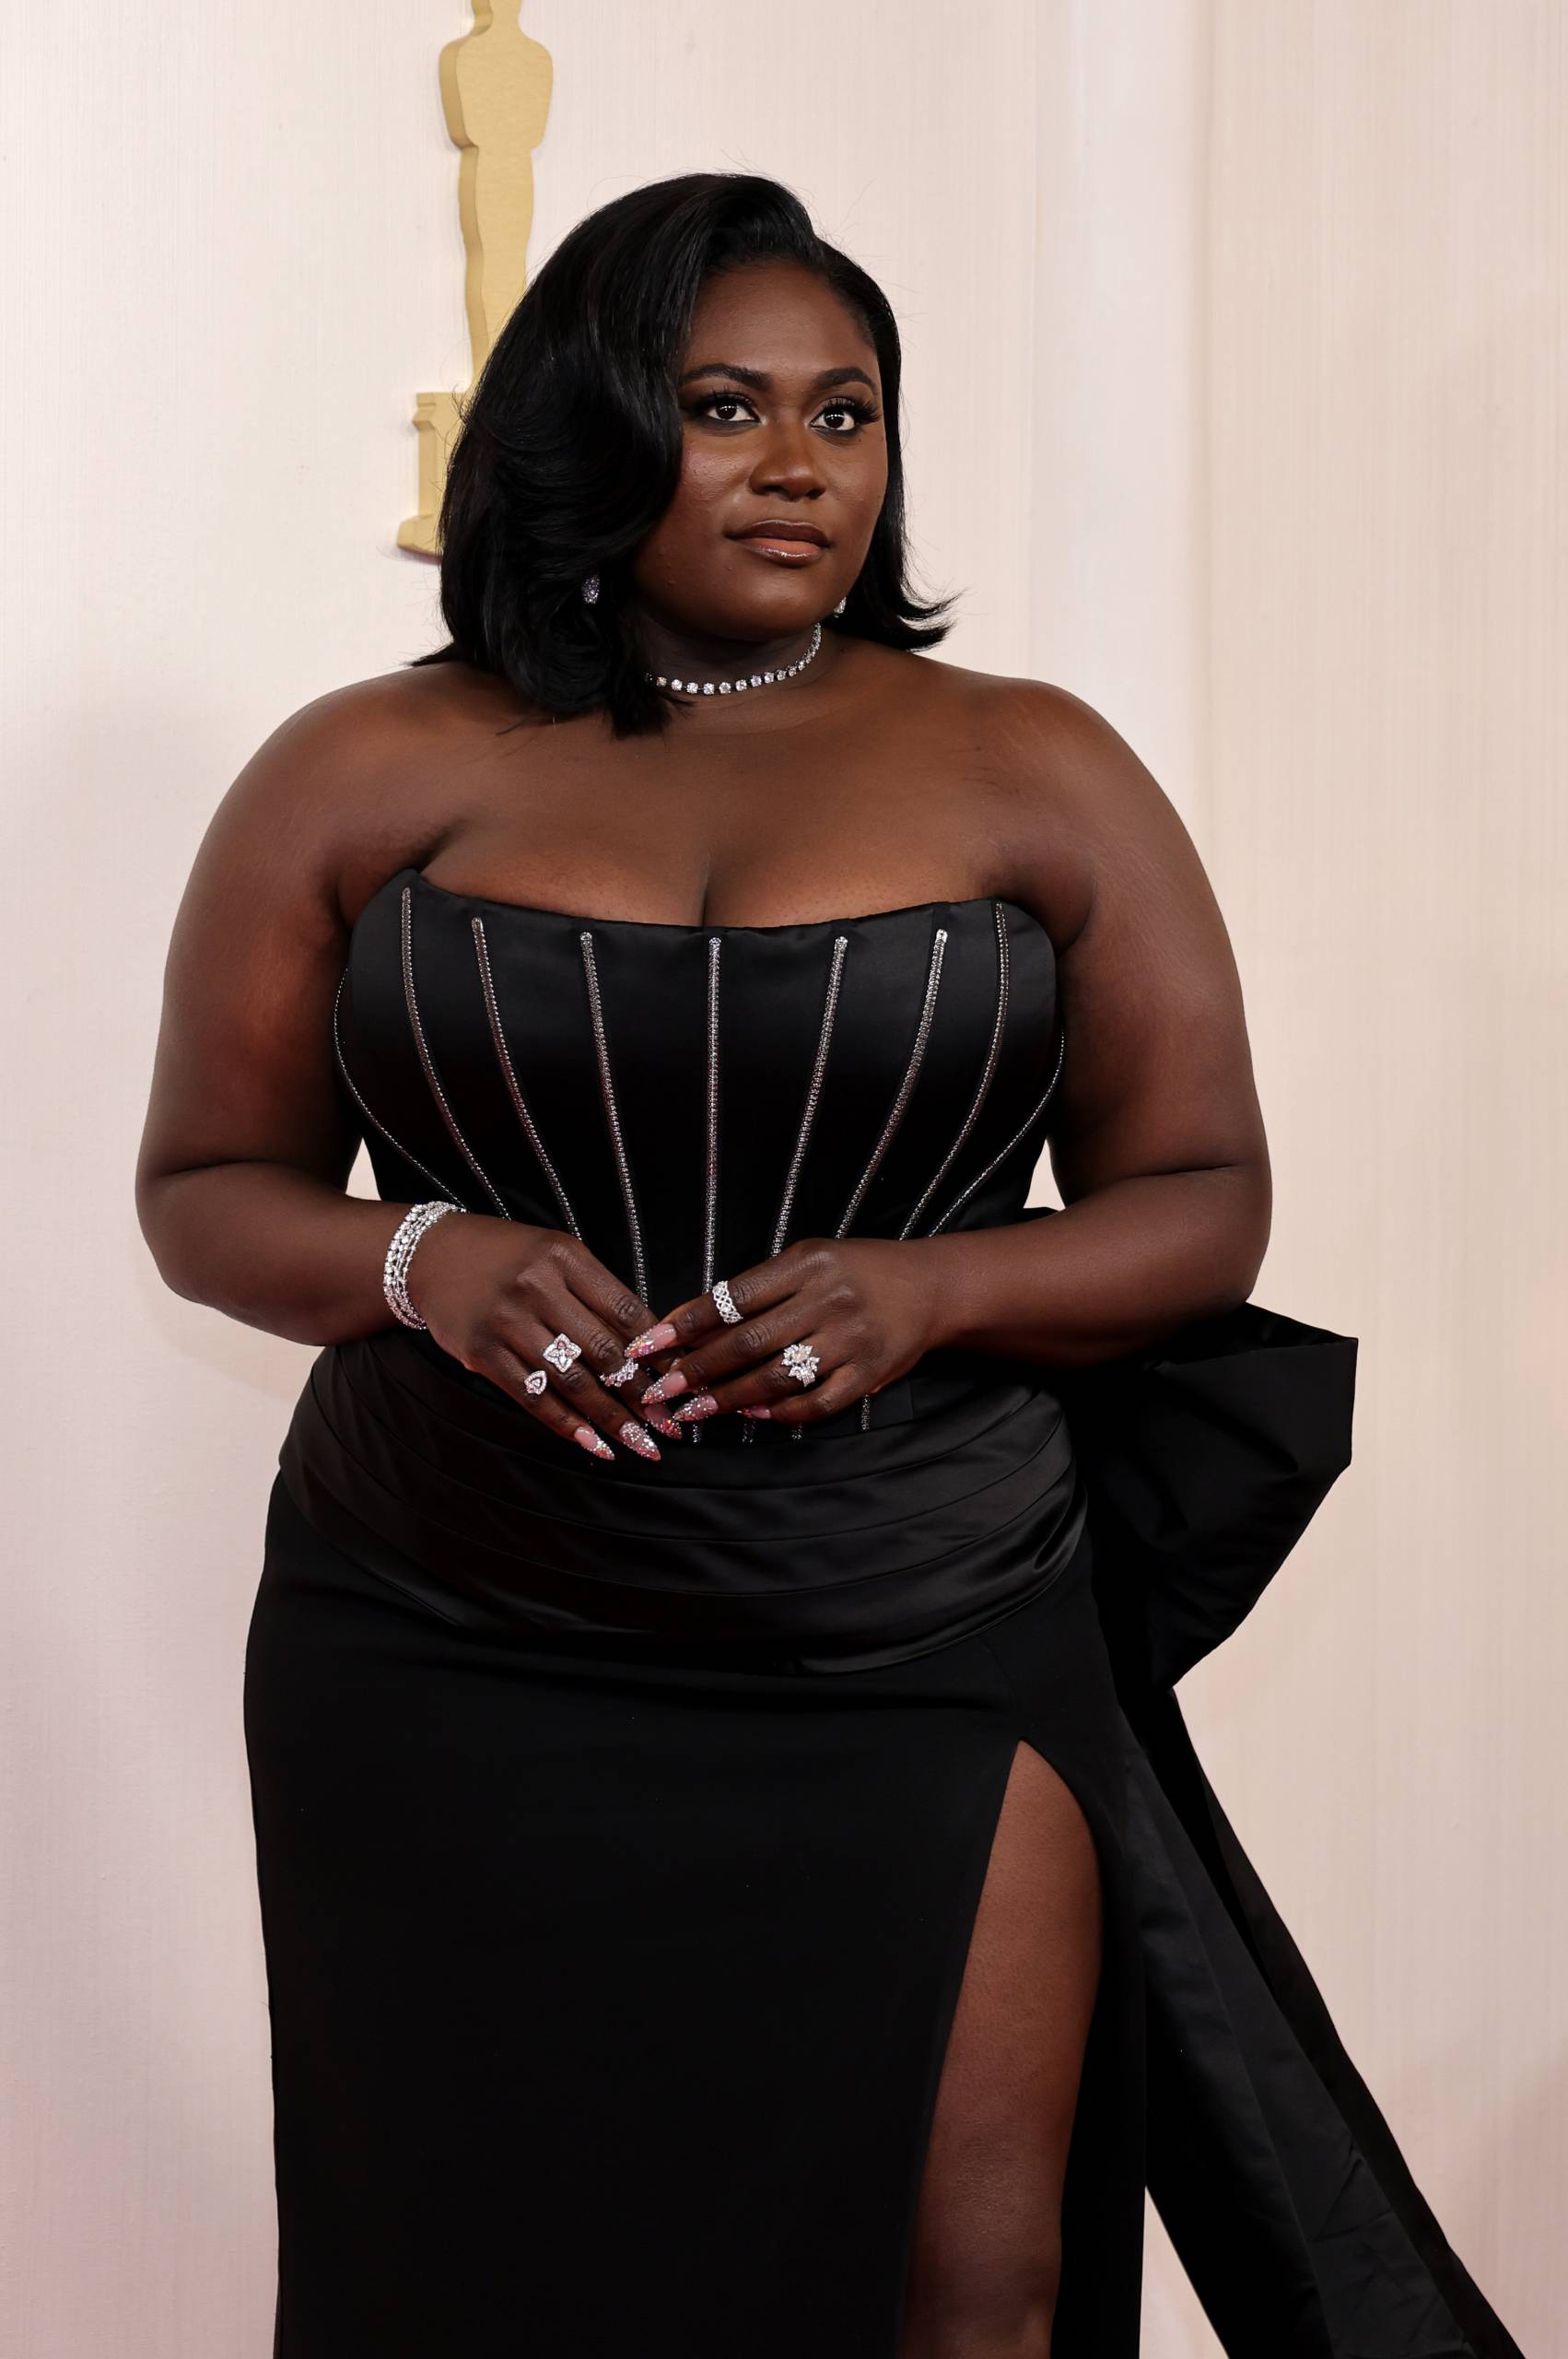 A curvy Black woman stands wearing a strapless black gown with high leg slit.